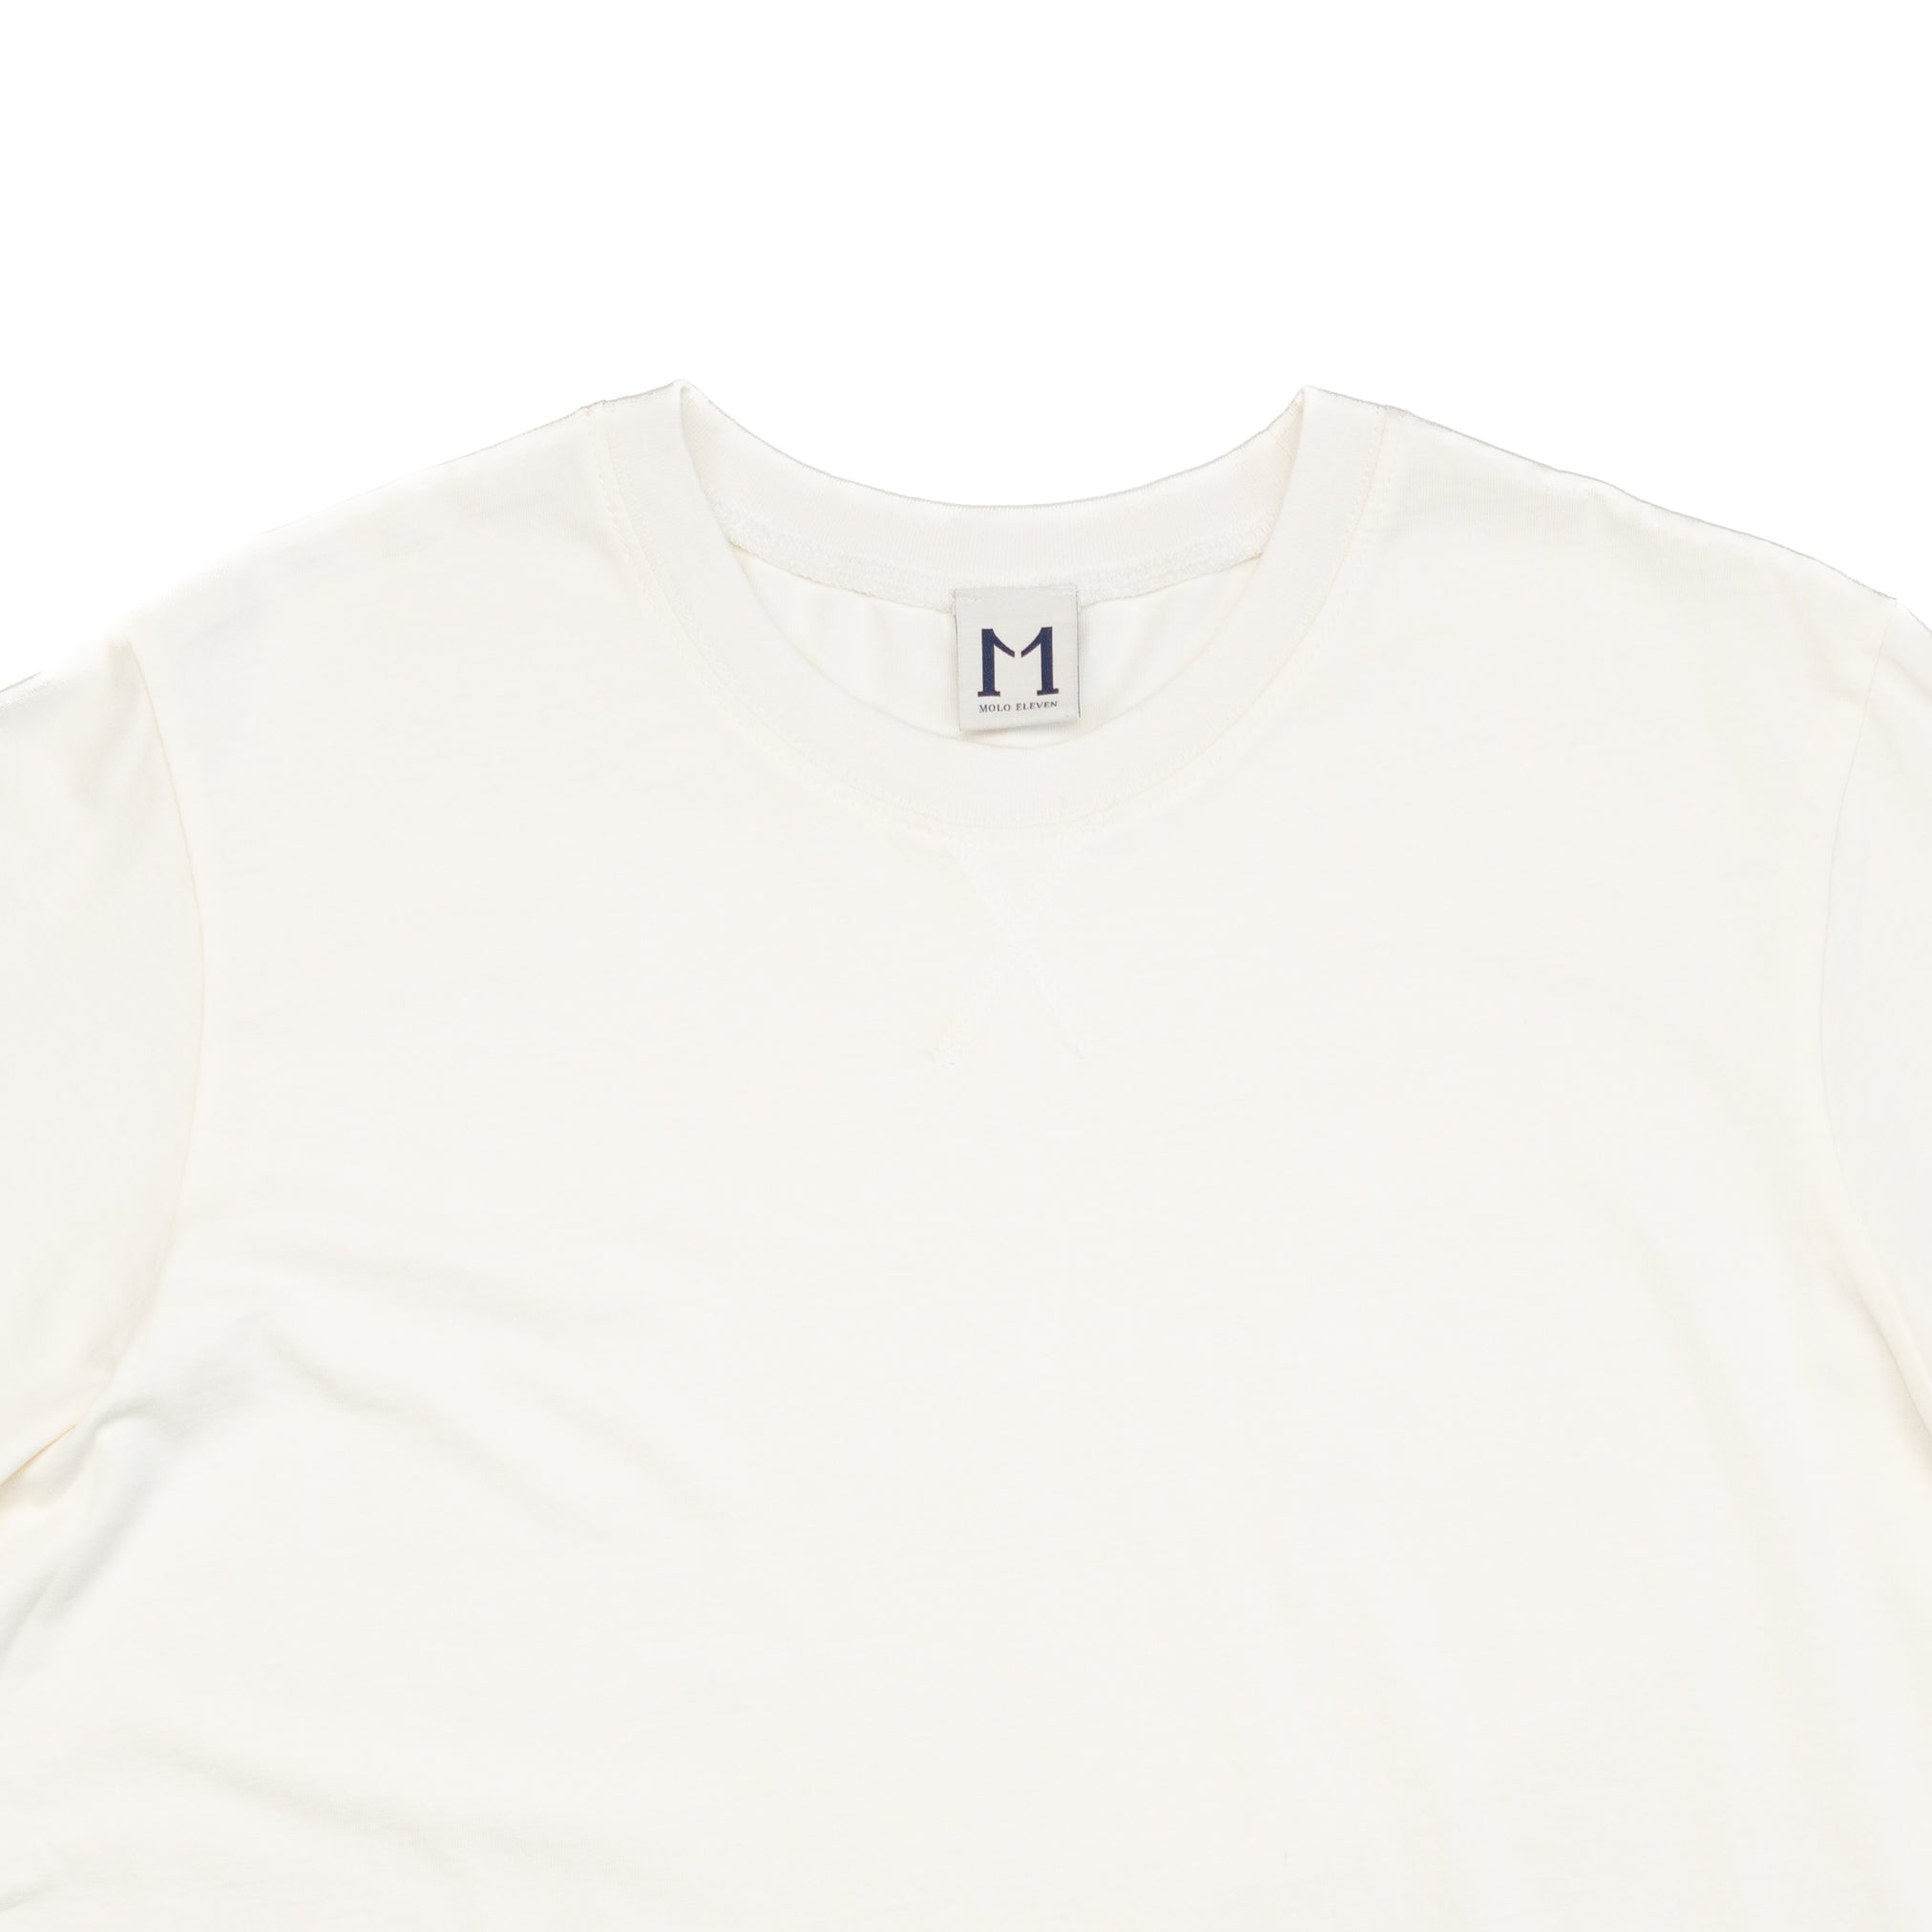 The Grant T-Shirt in Off White